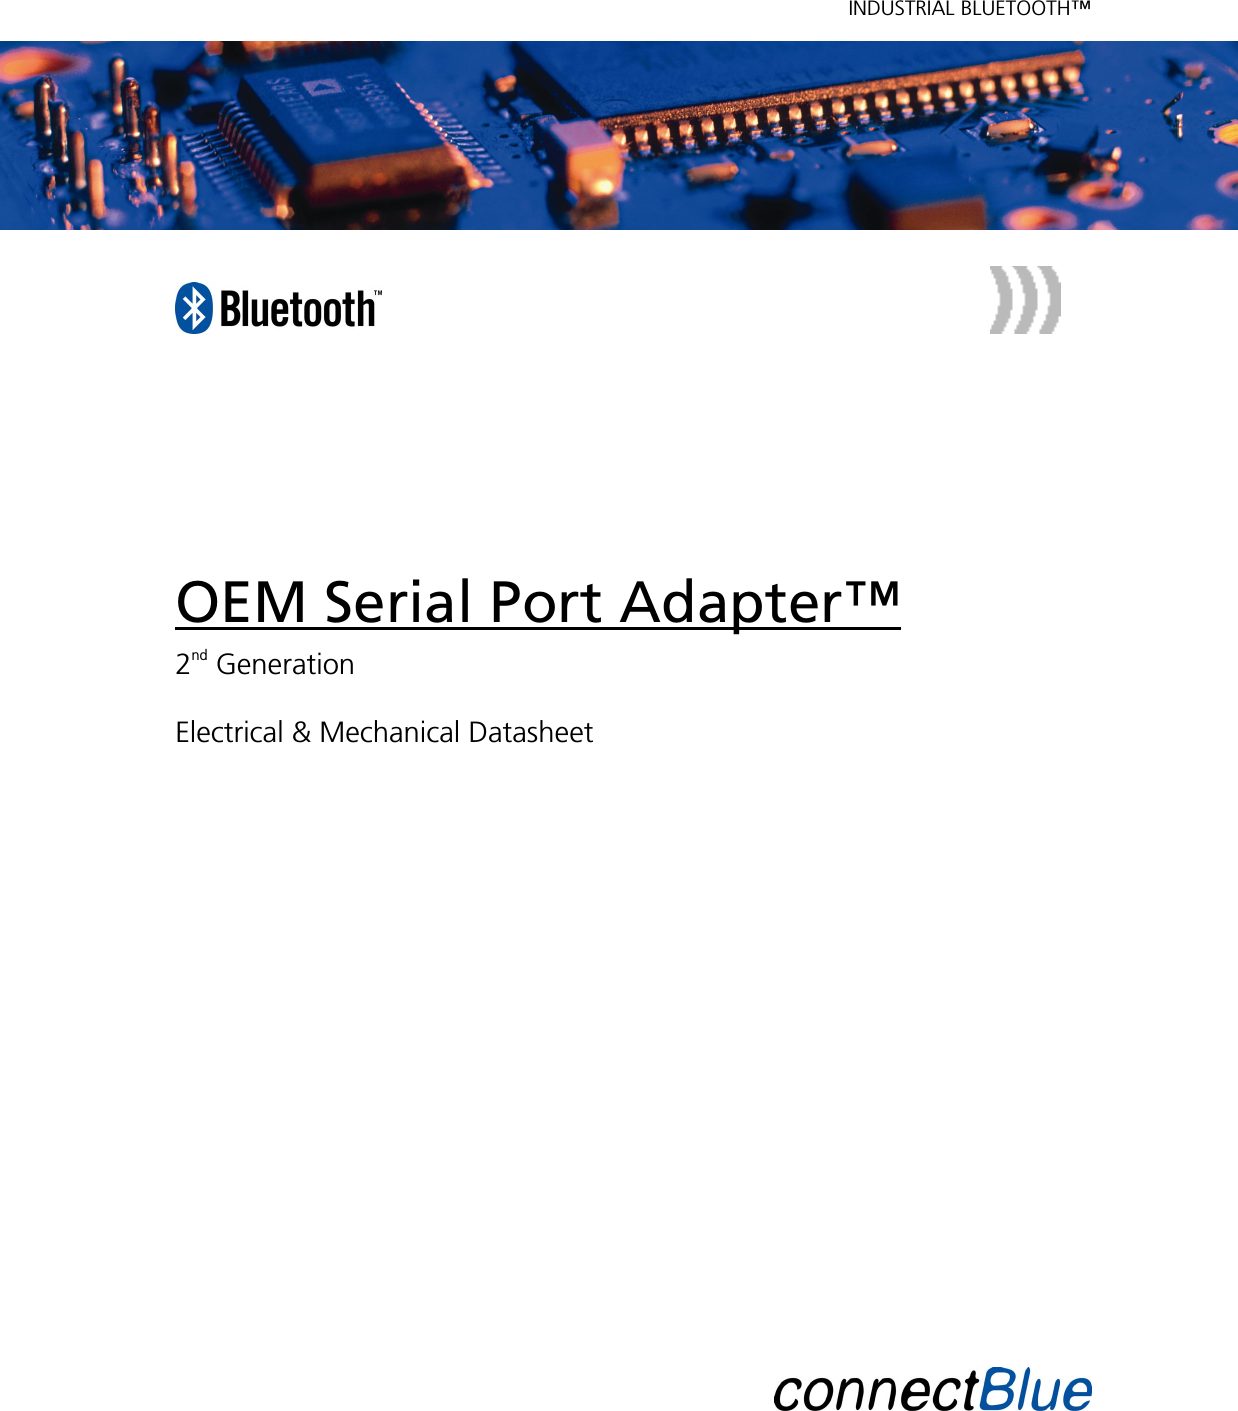   INDUSTRIAL BLUETOOTH™              OEM Serial Port Adapter™ 2nd Generation  Electrical &amp; Mechanical Datasheet                       